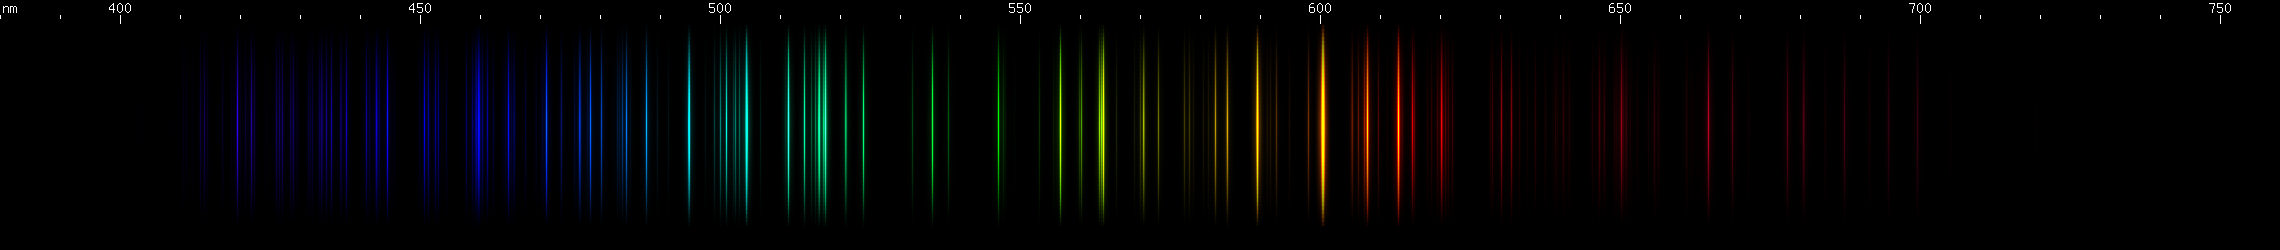 Spectral lines of Antimony.